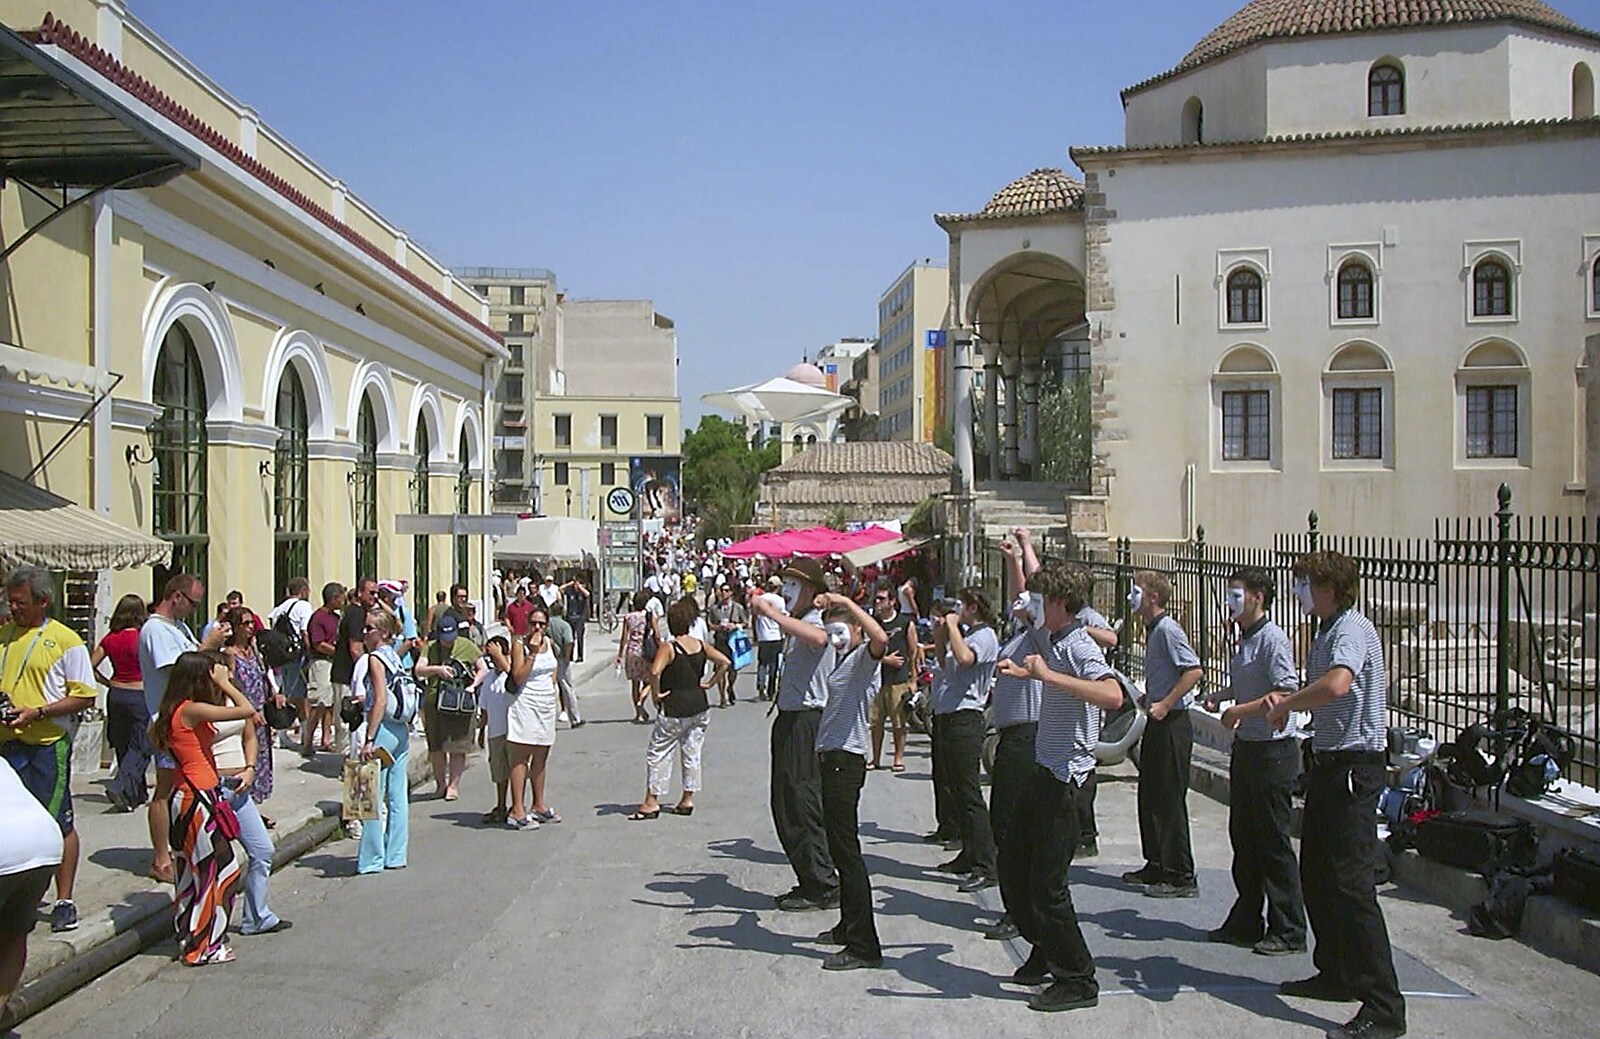 A Postcard From Athens: A Day Trip to the Olympics, Greece - 19th August 2004: The mimes are still going